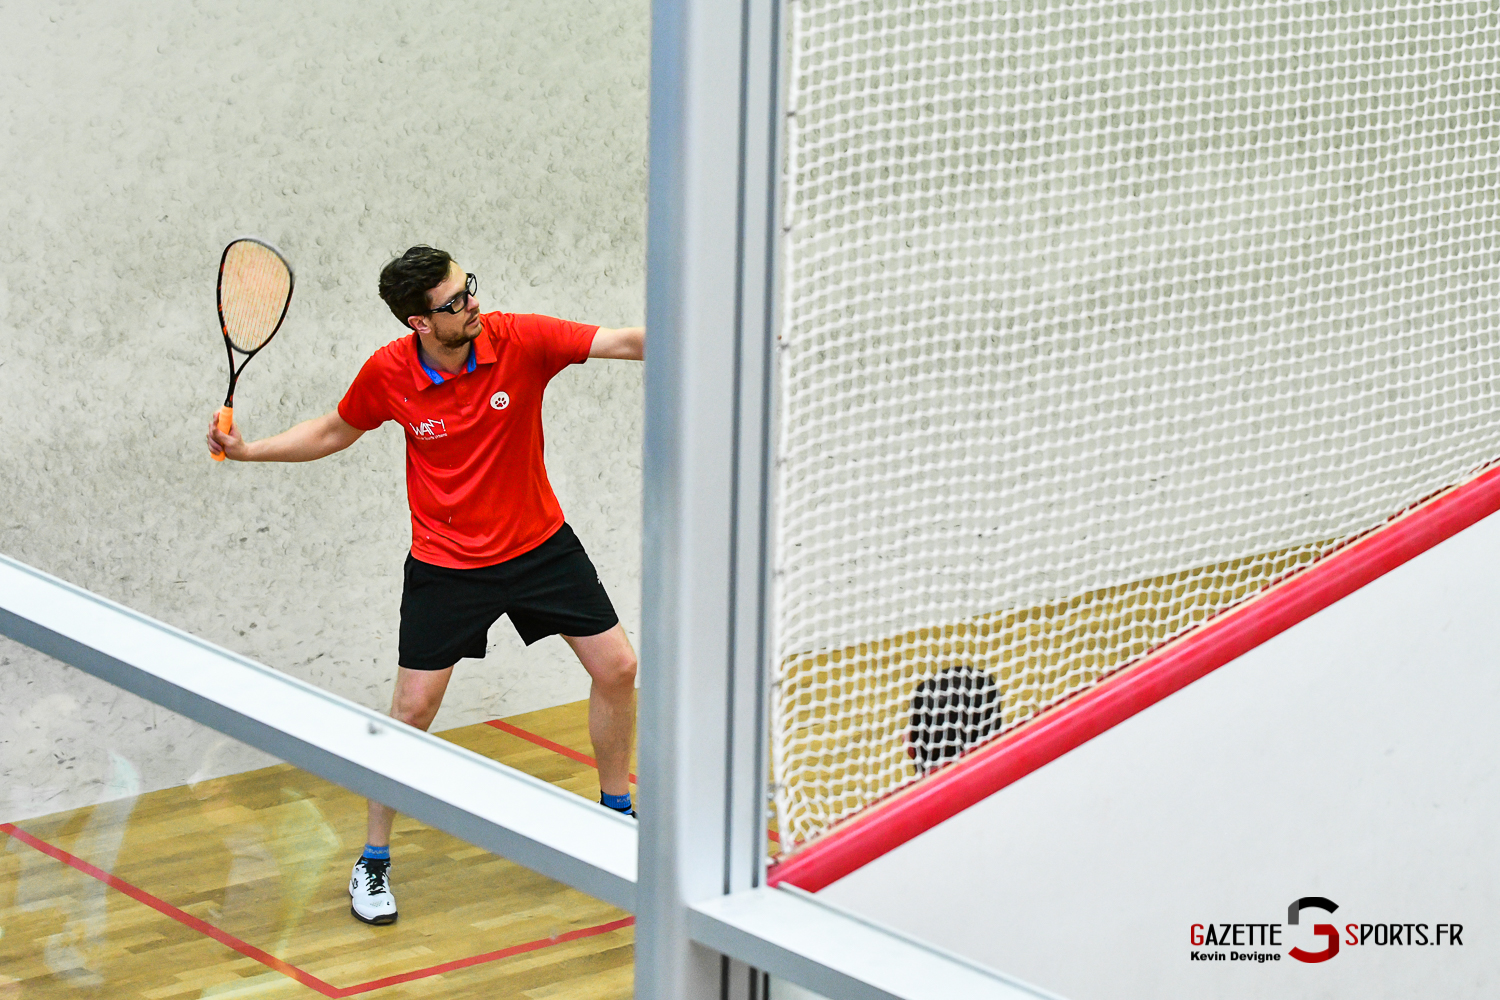 PHOTOS: Look at the pictures of the squash league championship